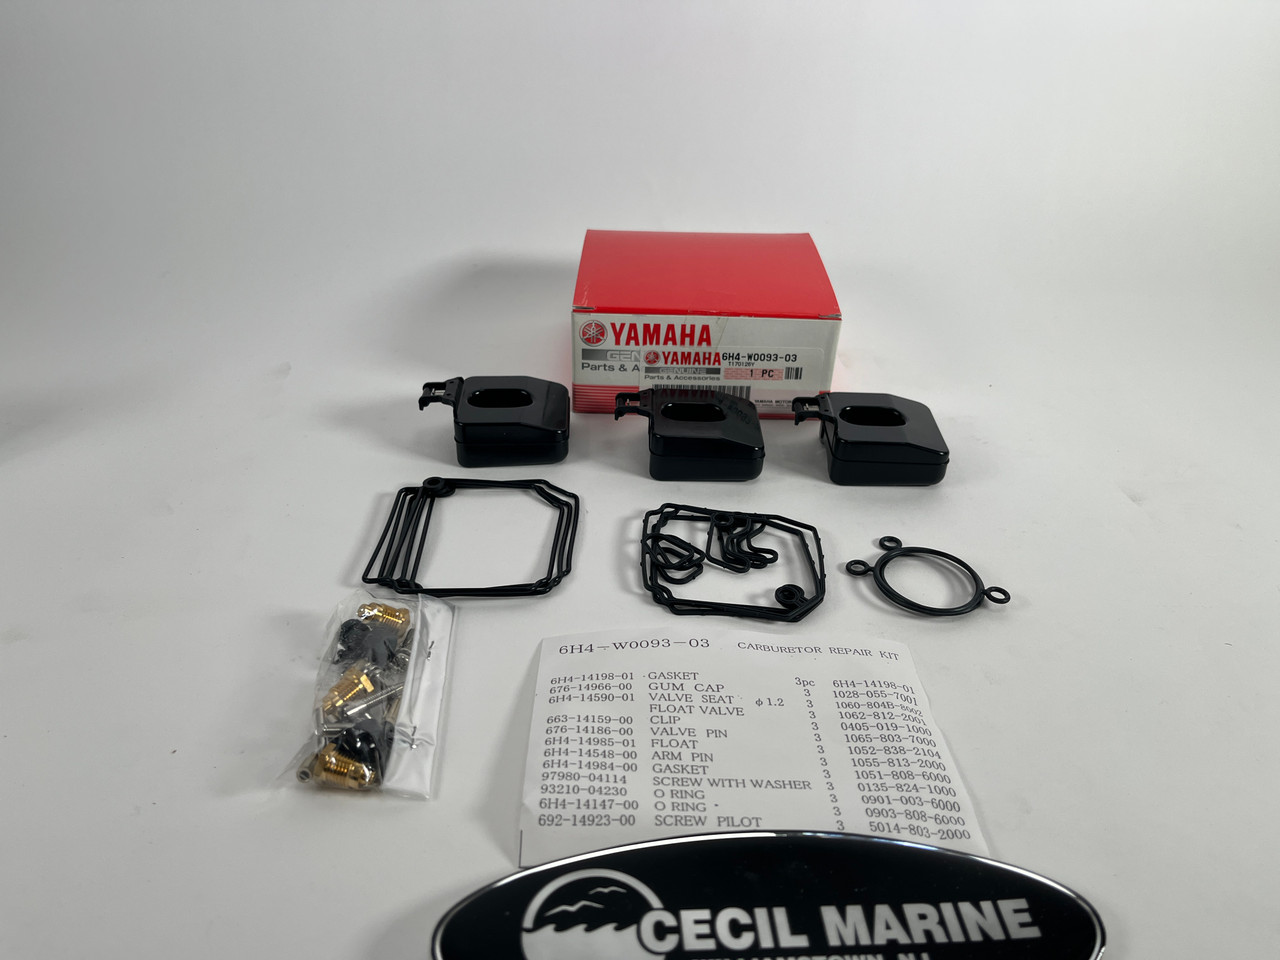 $239.99* GENUINE YAMAHA no tax* CARB REPAIR KIT 6H4-W0093-03-00  *In Stock & Ready To Ship!